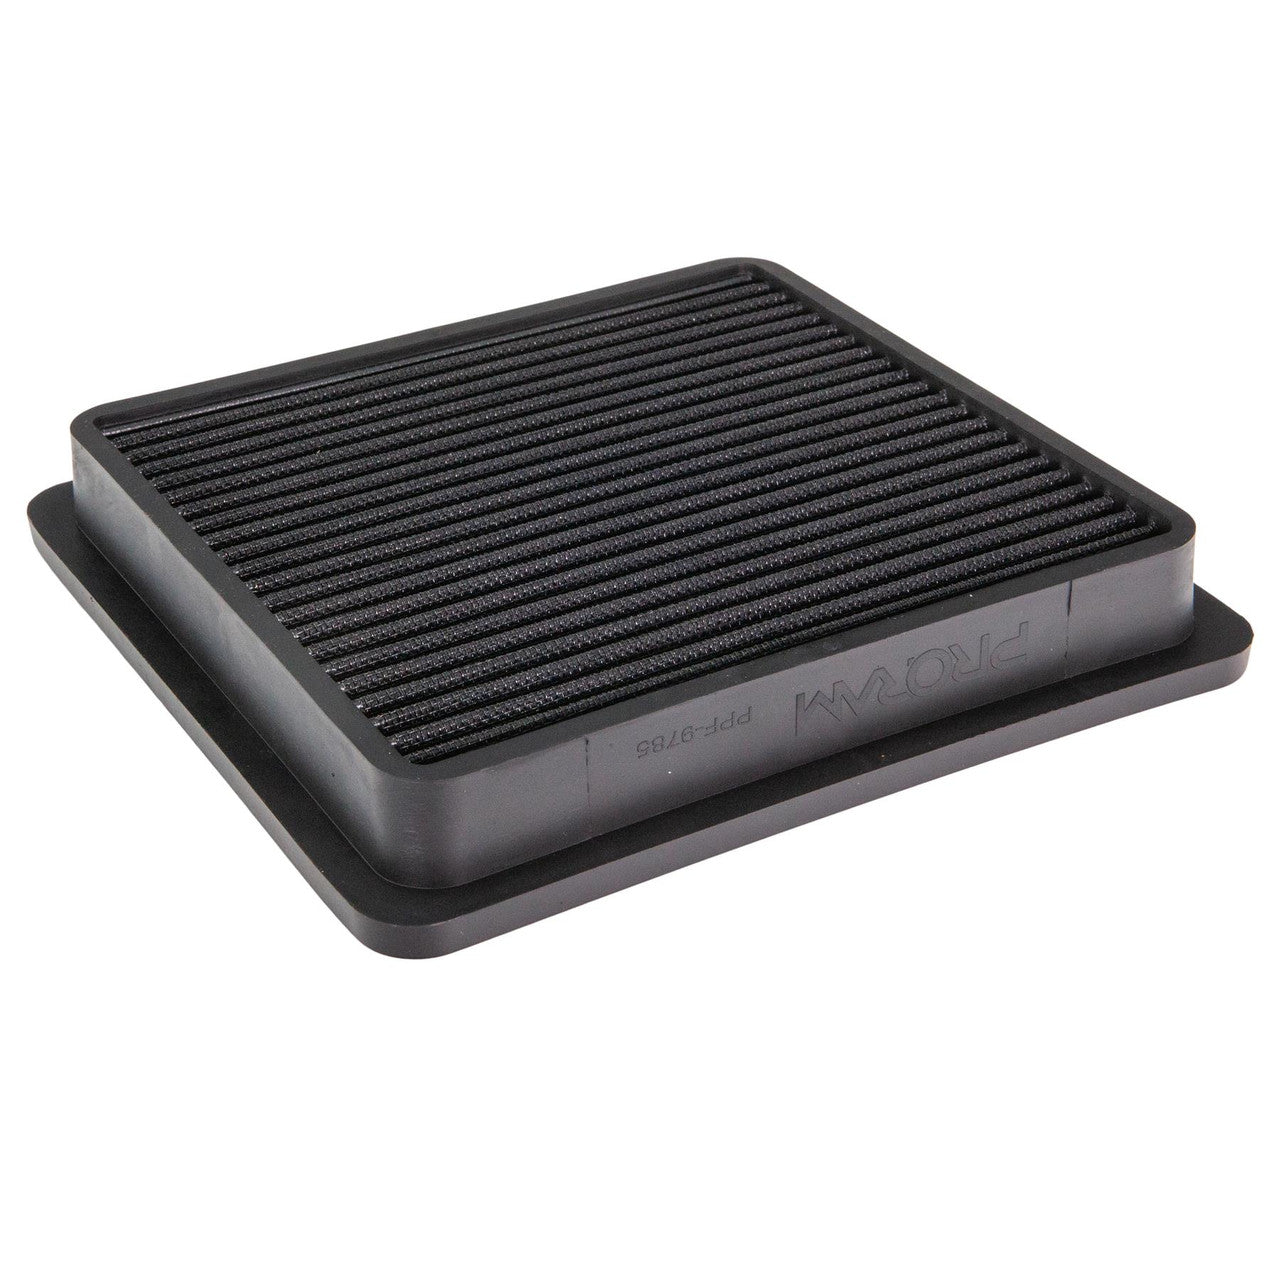 PPF-9785 - Subaru Replacement Pleated Air Filter